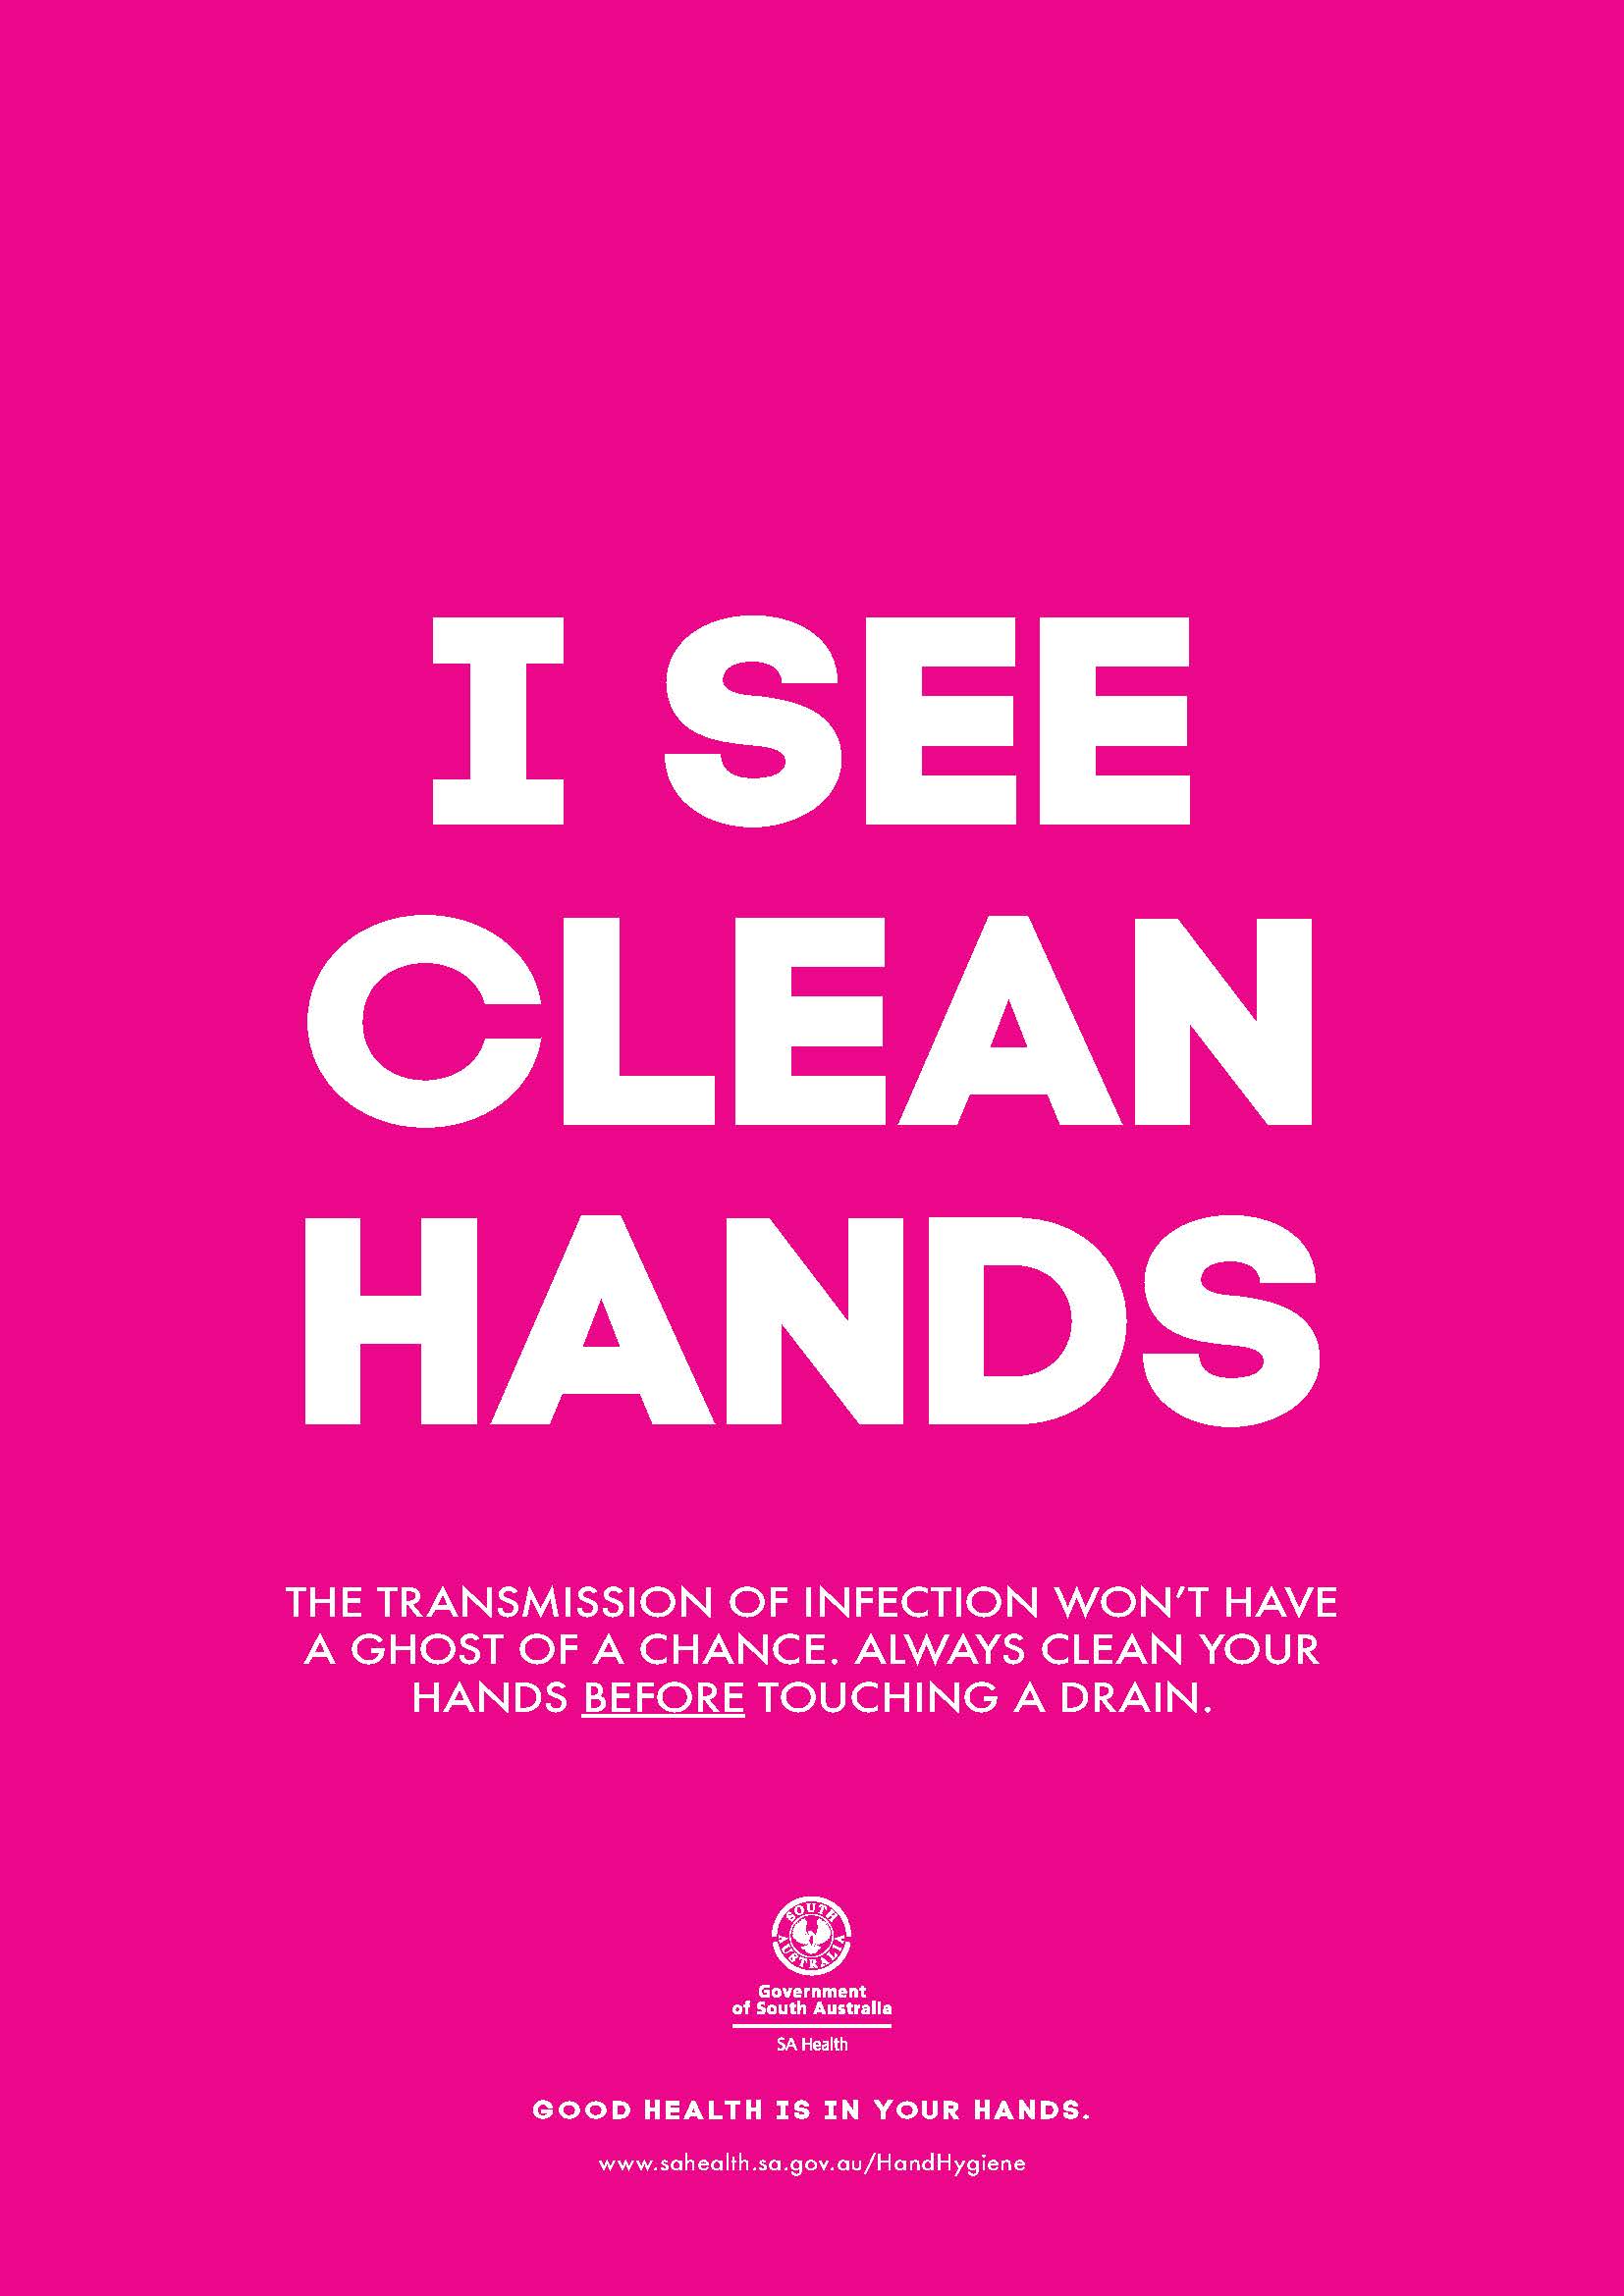 Hand hygiene poster - I see clean hands